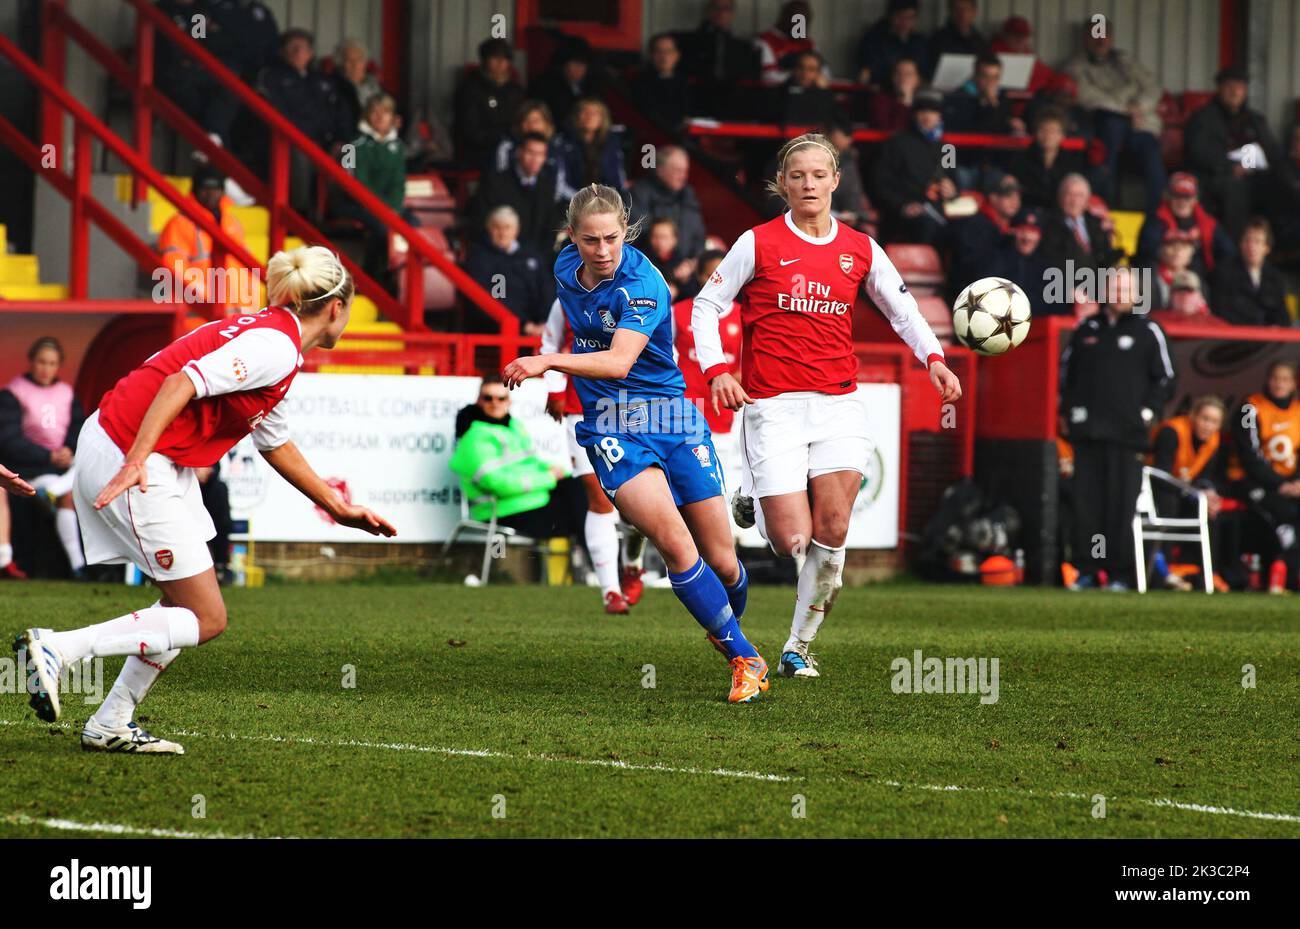 Champions League quarterfinals, Arsenal vs. Linköping football club. Linköping FC took the lead in the Champions League quarter-final against Arsenal at Meadow Park outside London, UK. In the picture to the middle: Linköpings no. 18 Linda Sällström. Stock Photo